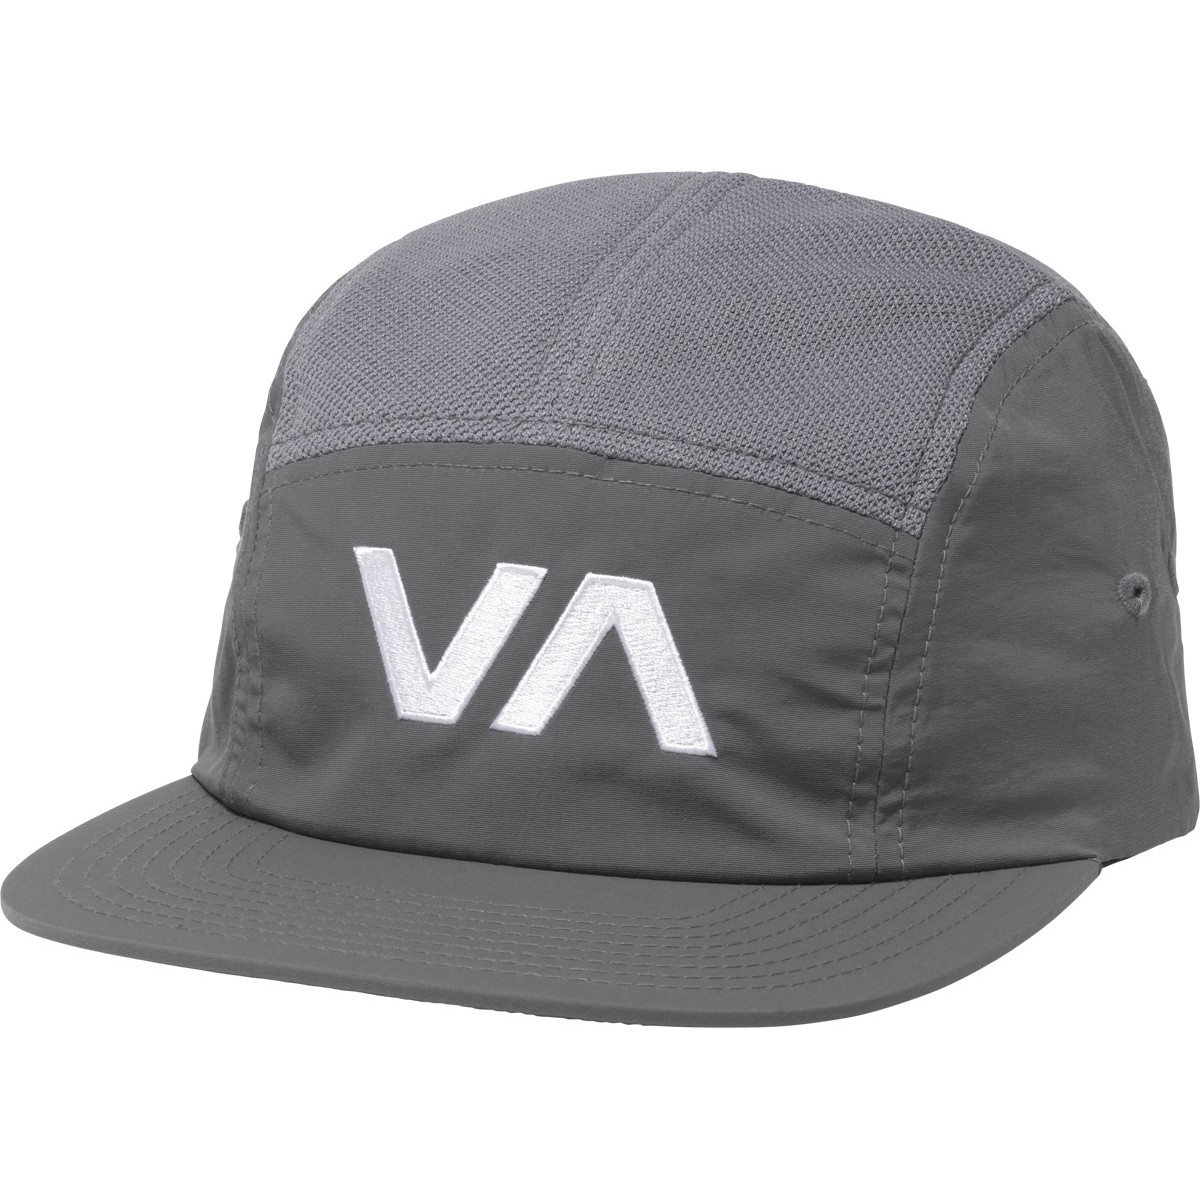 RVCA Trainer 2 Five Panel Hat- Charcoal